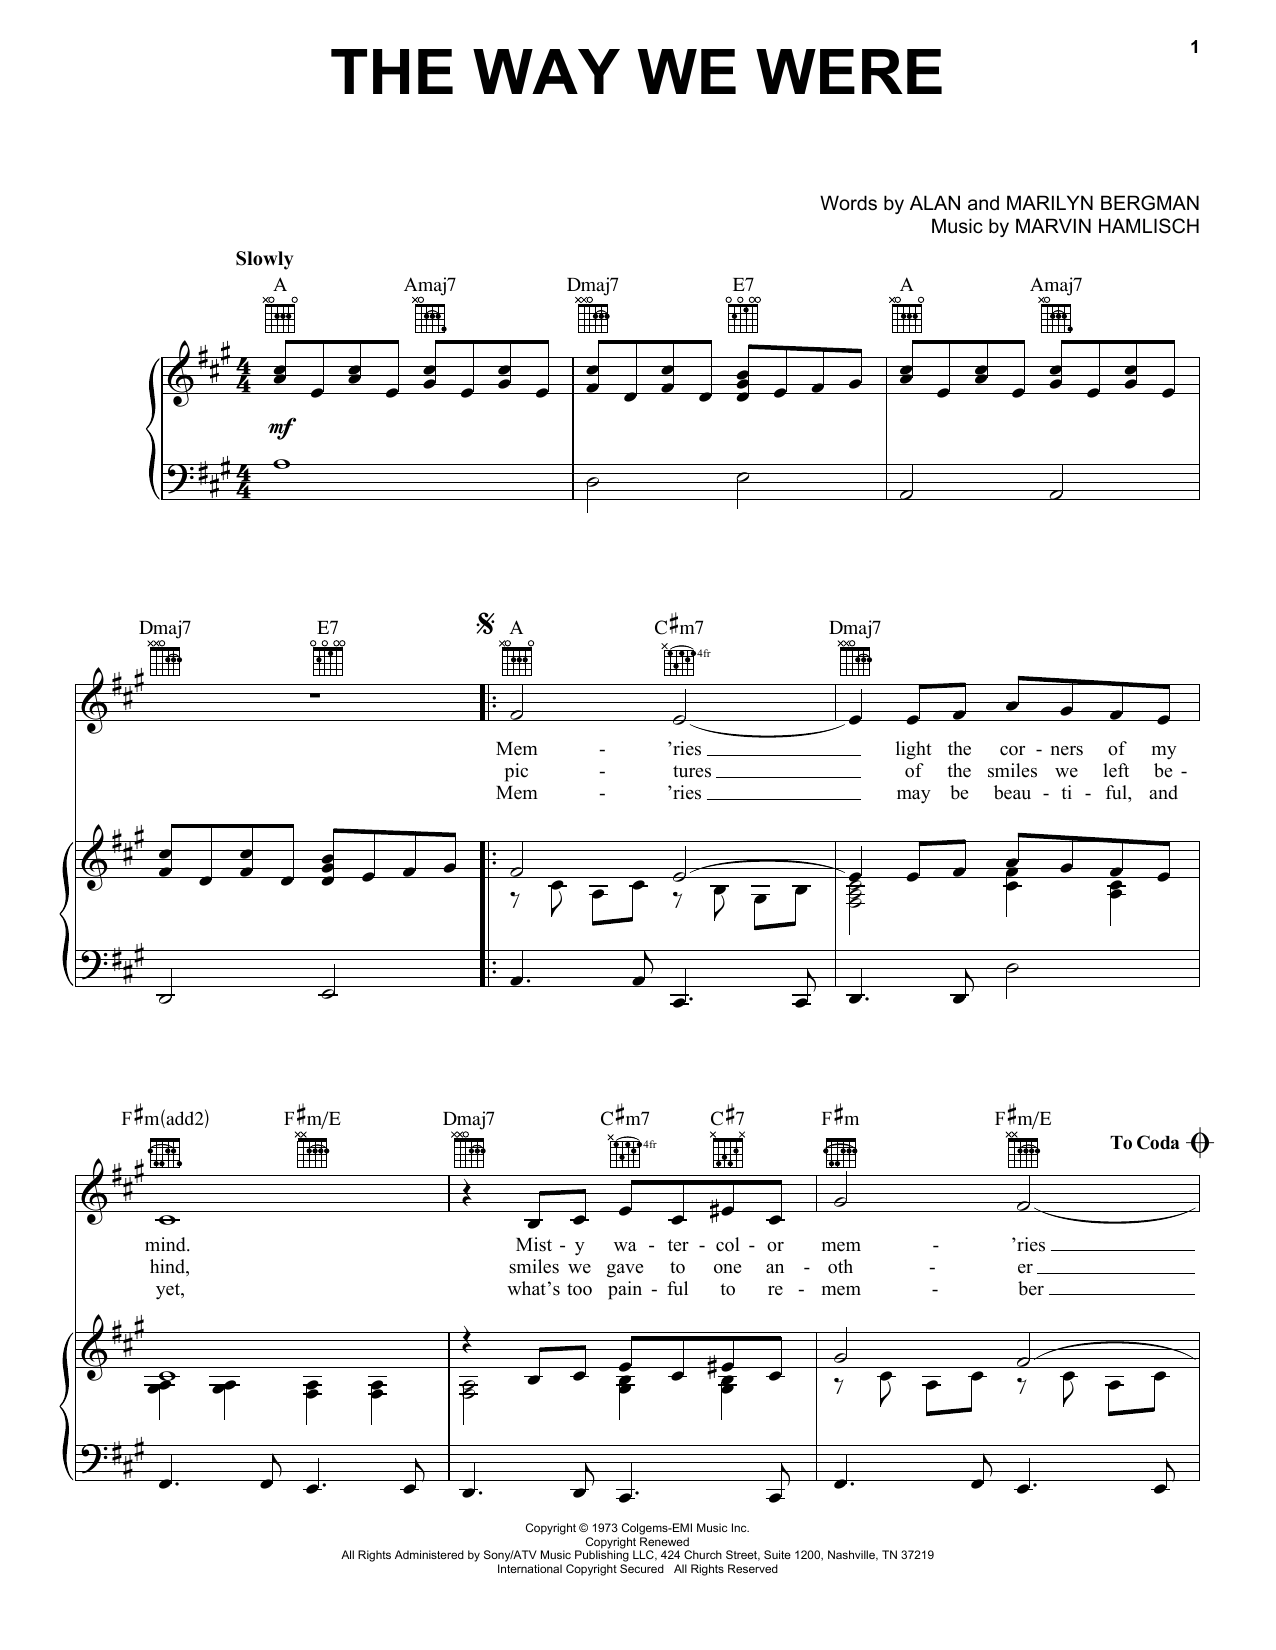 Barbra Streisand The Way We Were sheet music preview music notes and score for Accordion including 3 page(s)